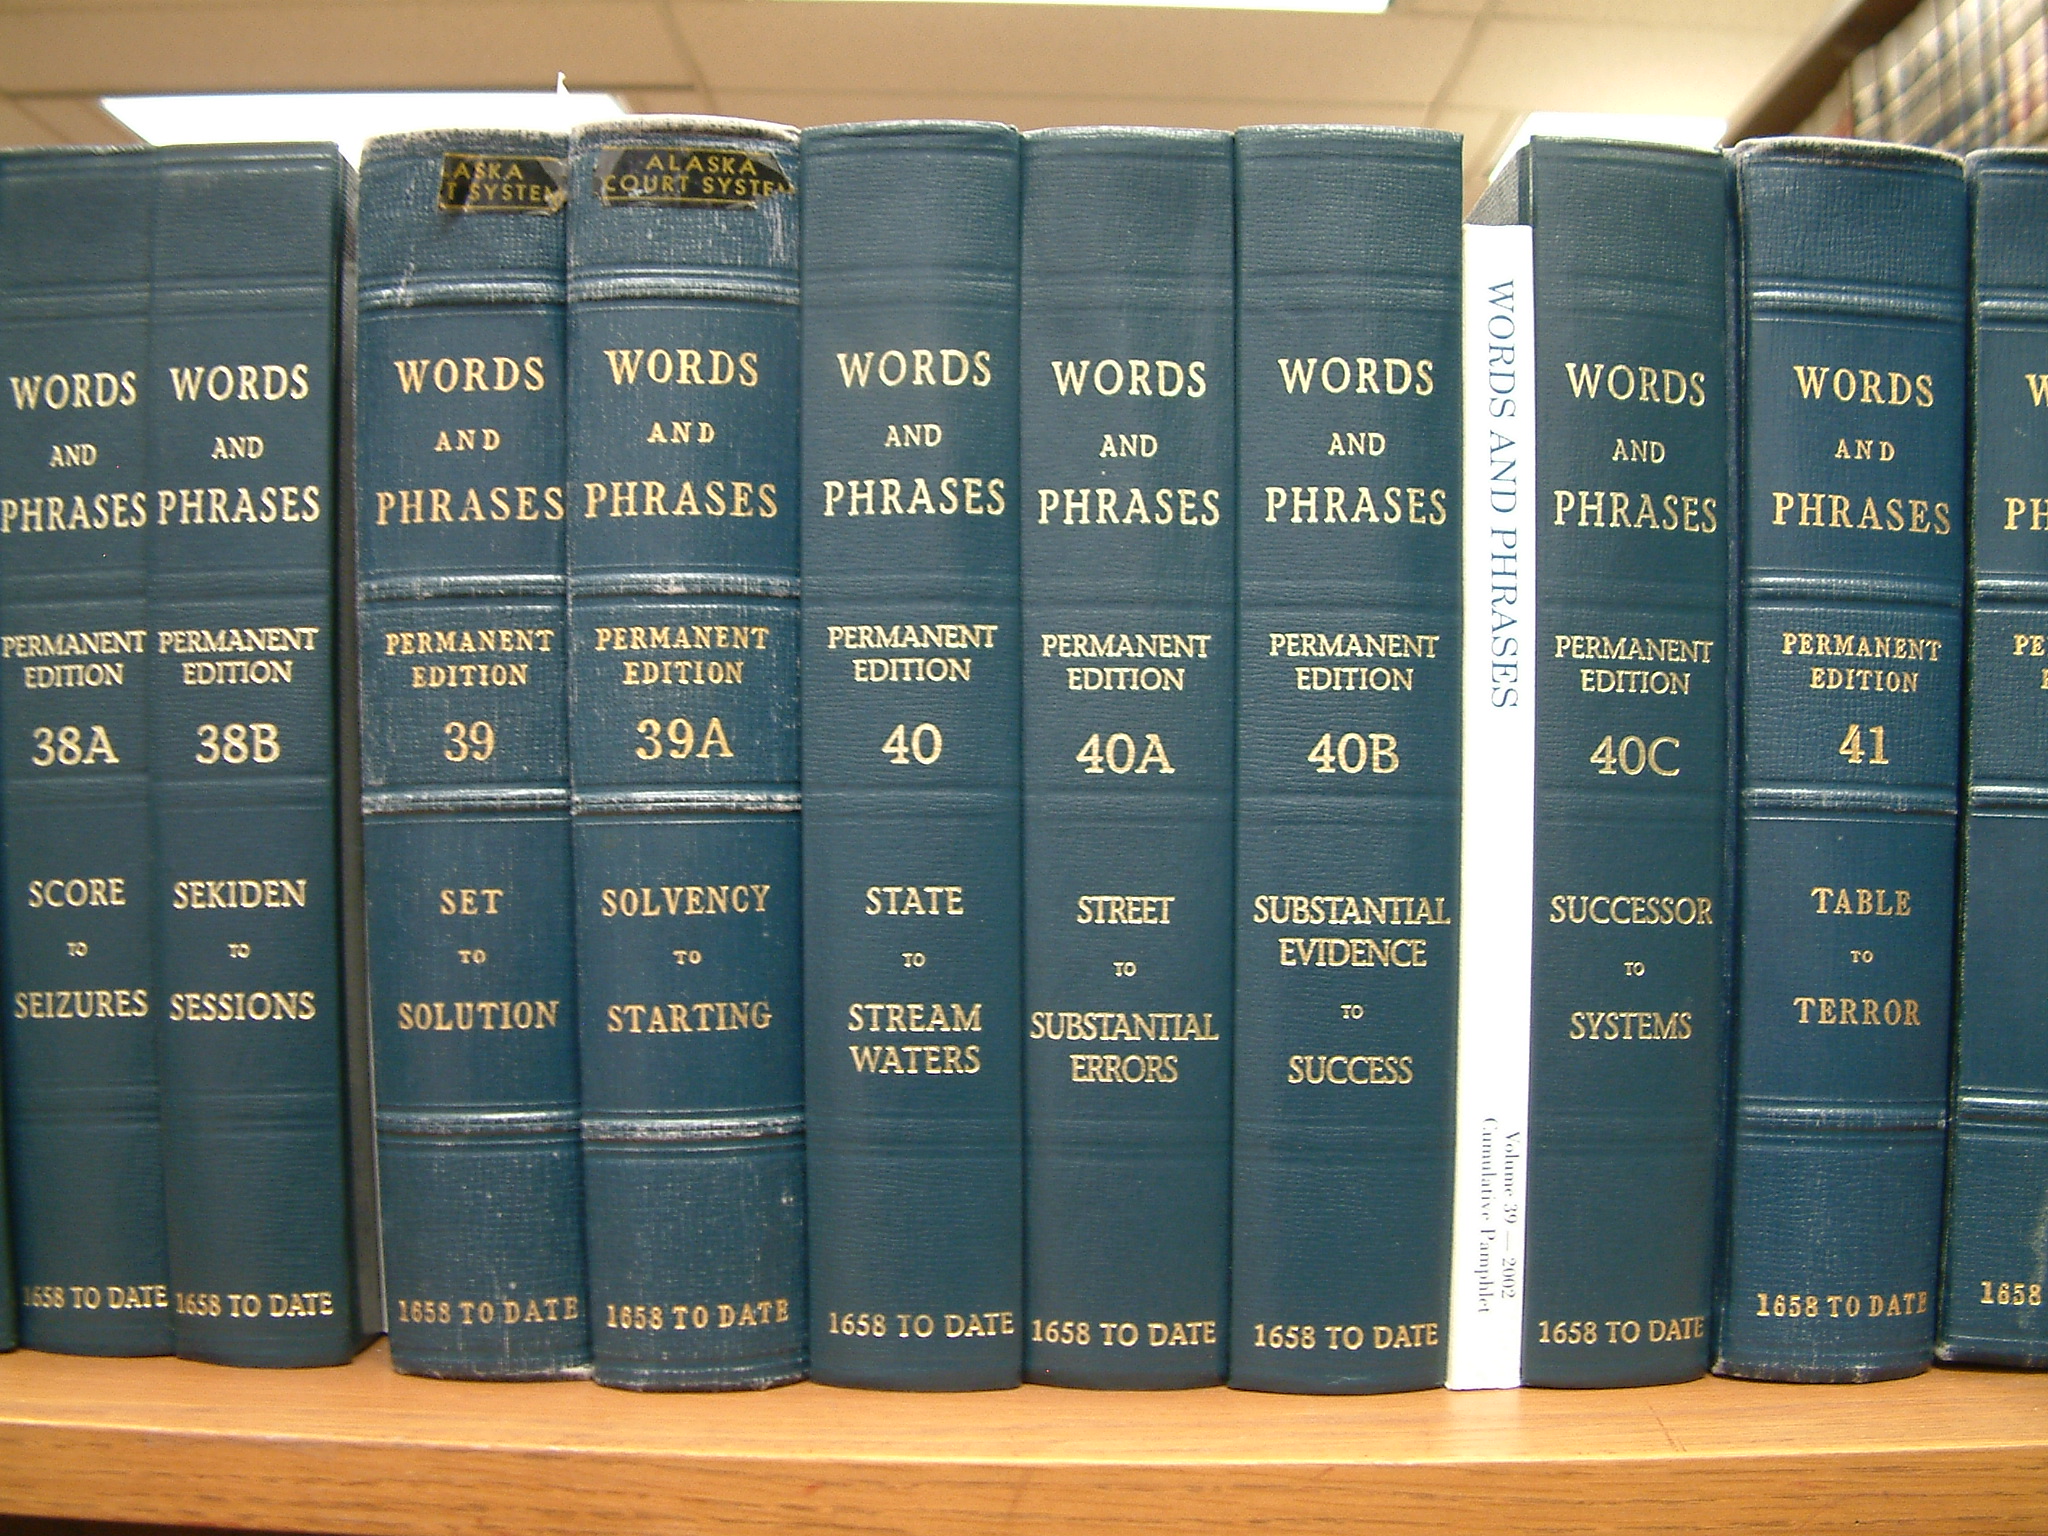 Law library books